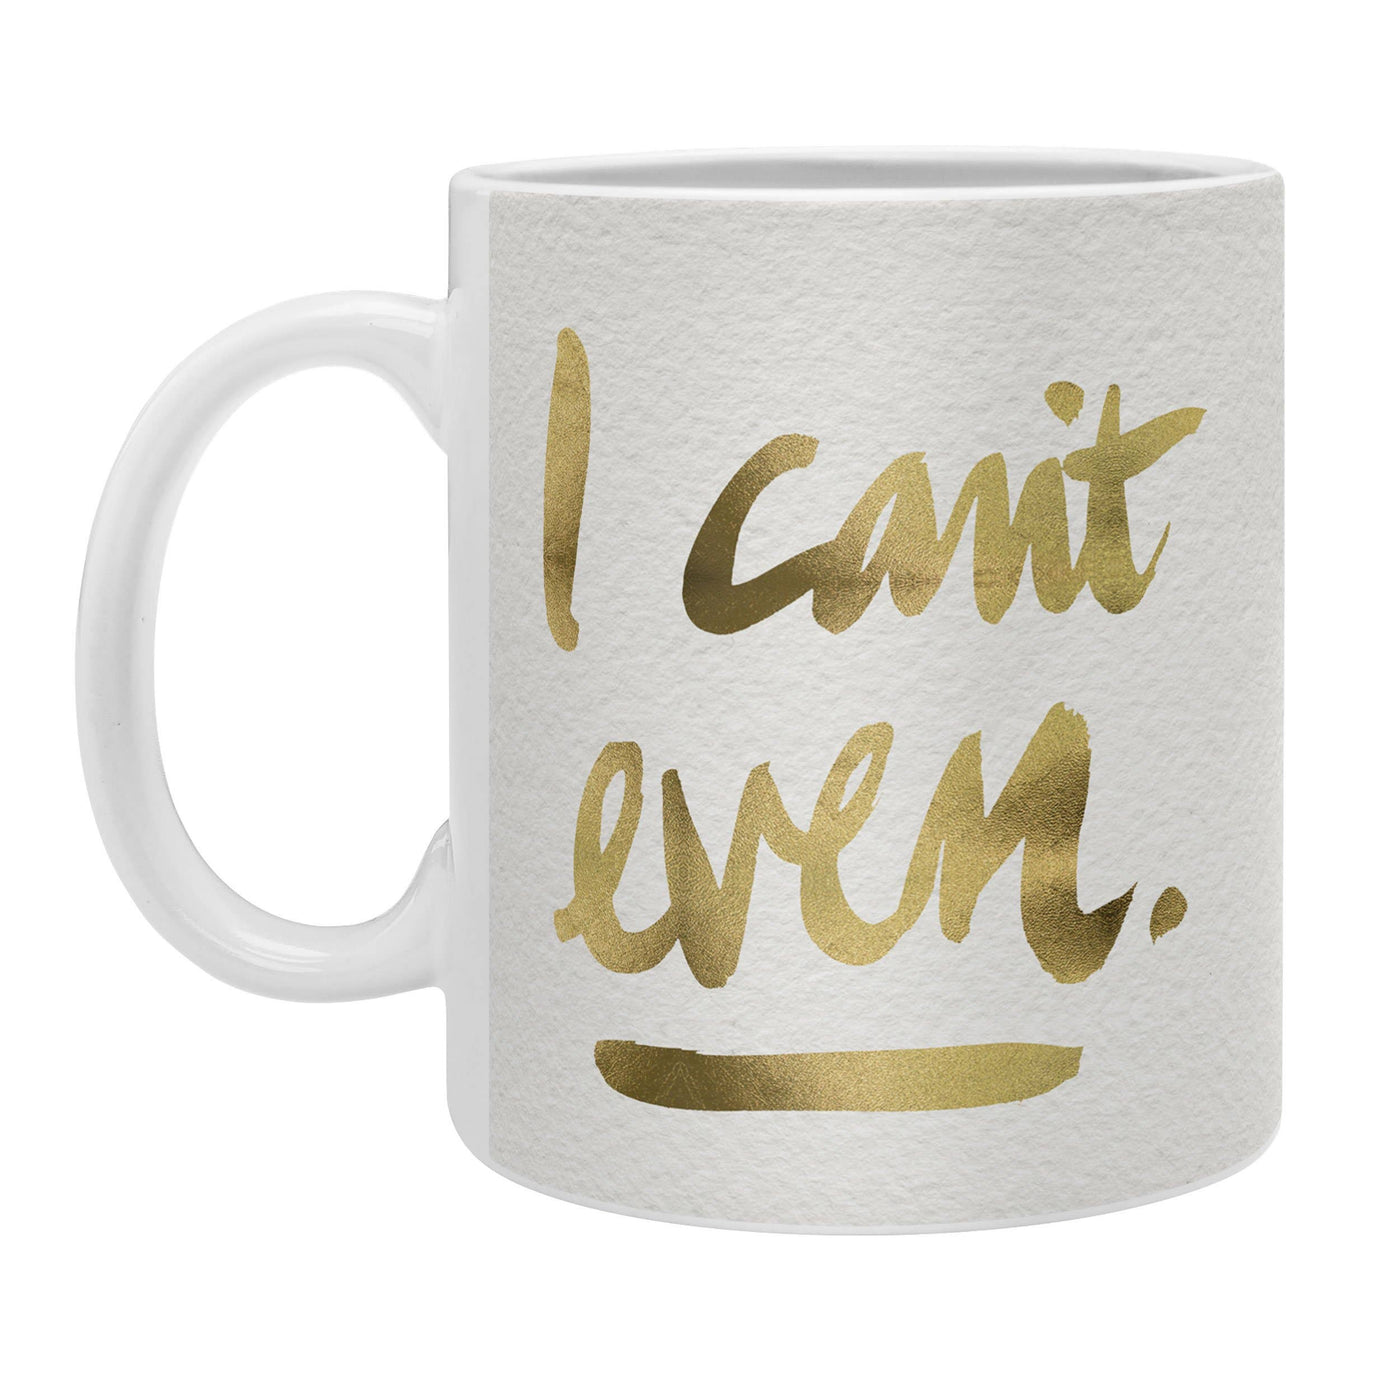 I Can't Even Gold Ink Coffee Mug